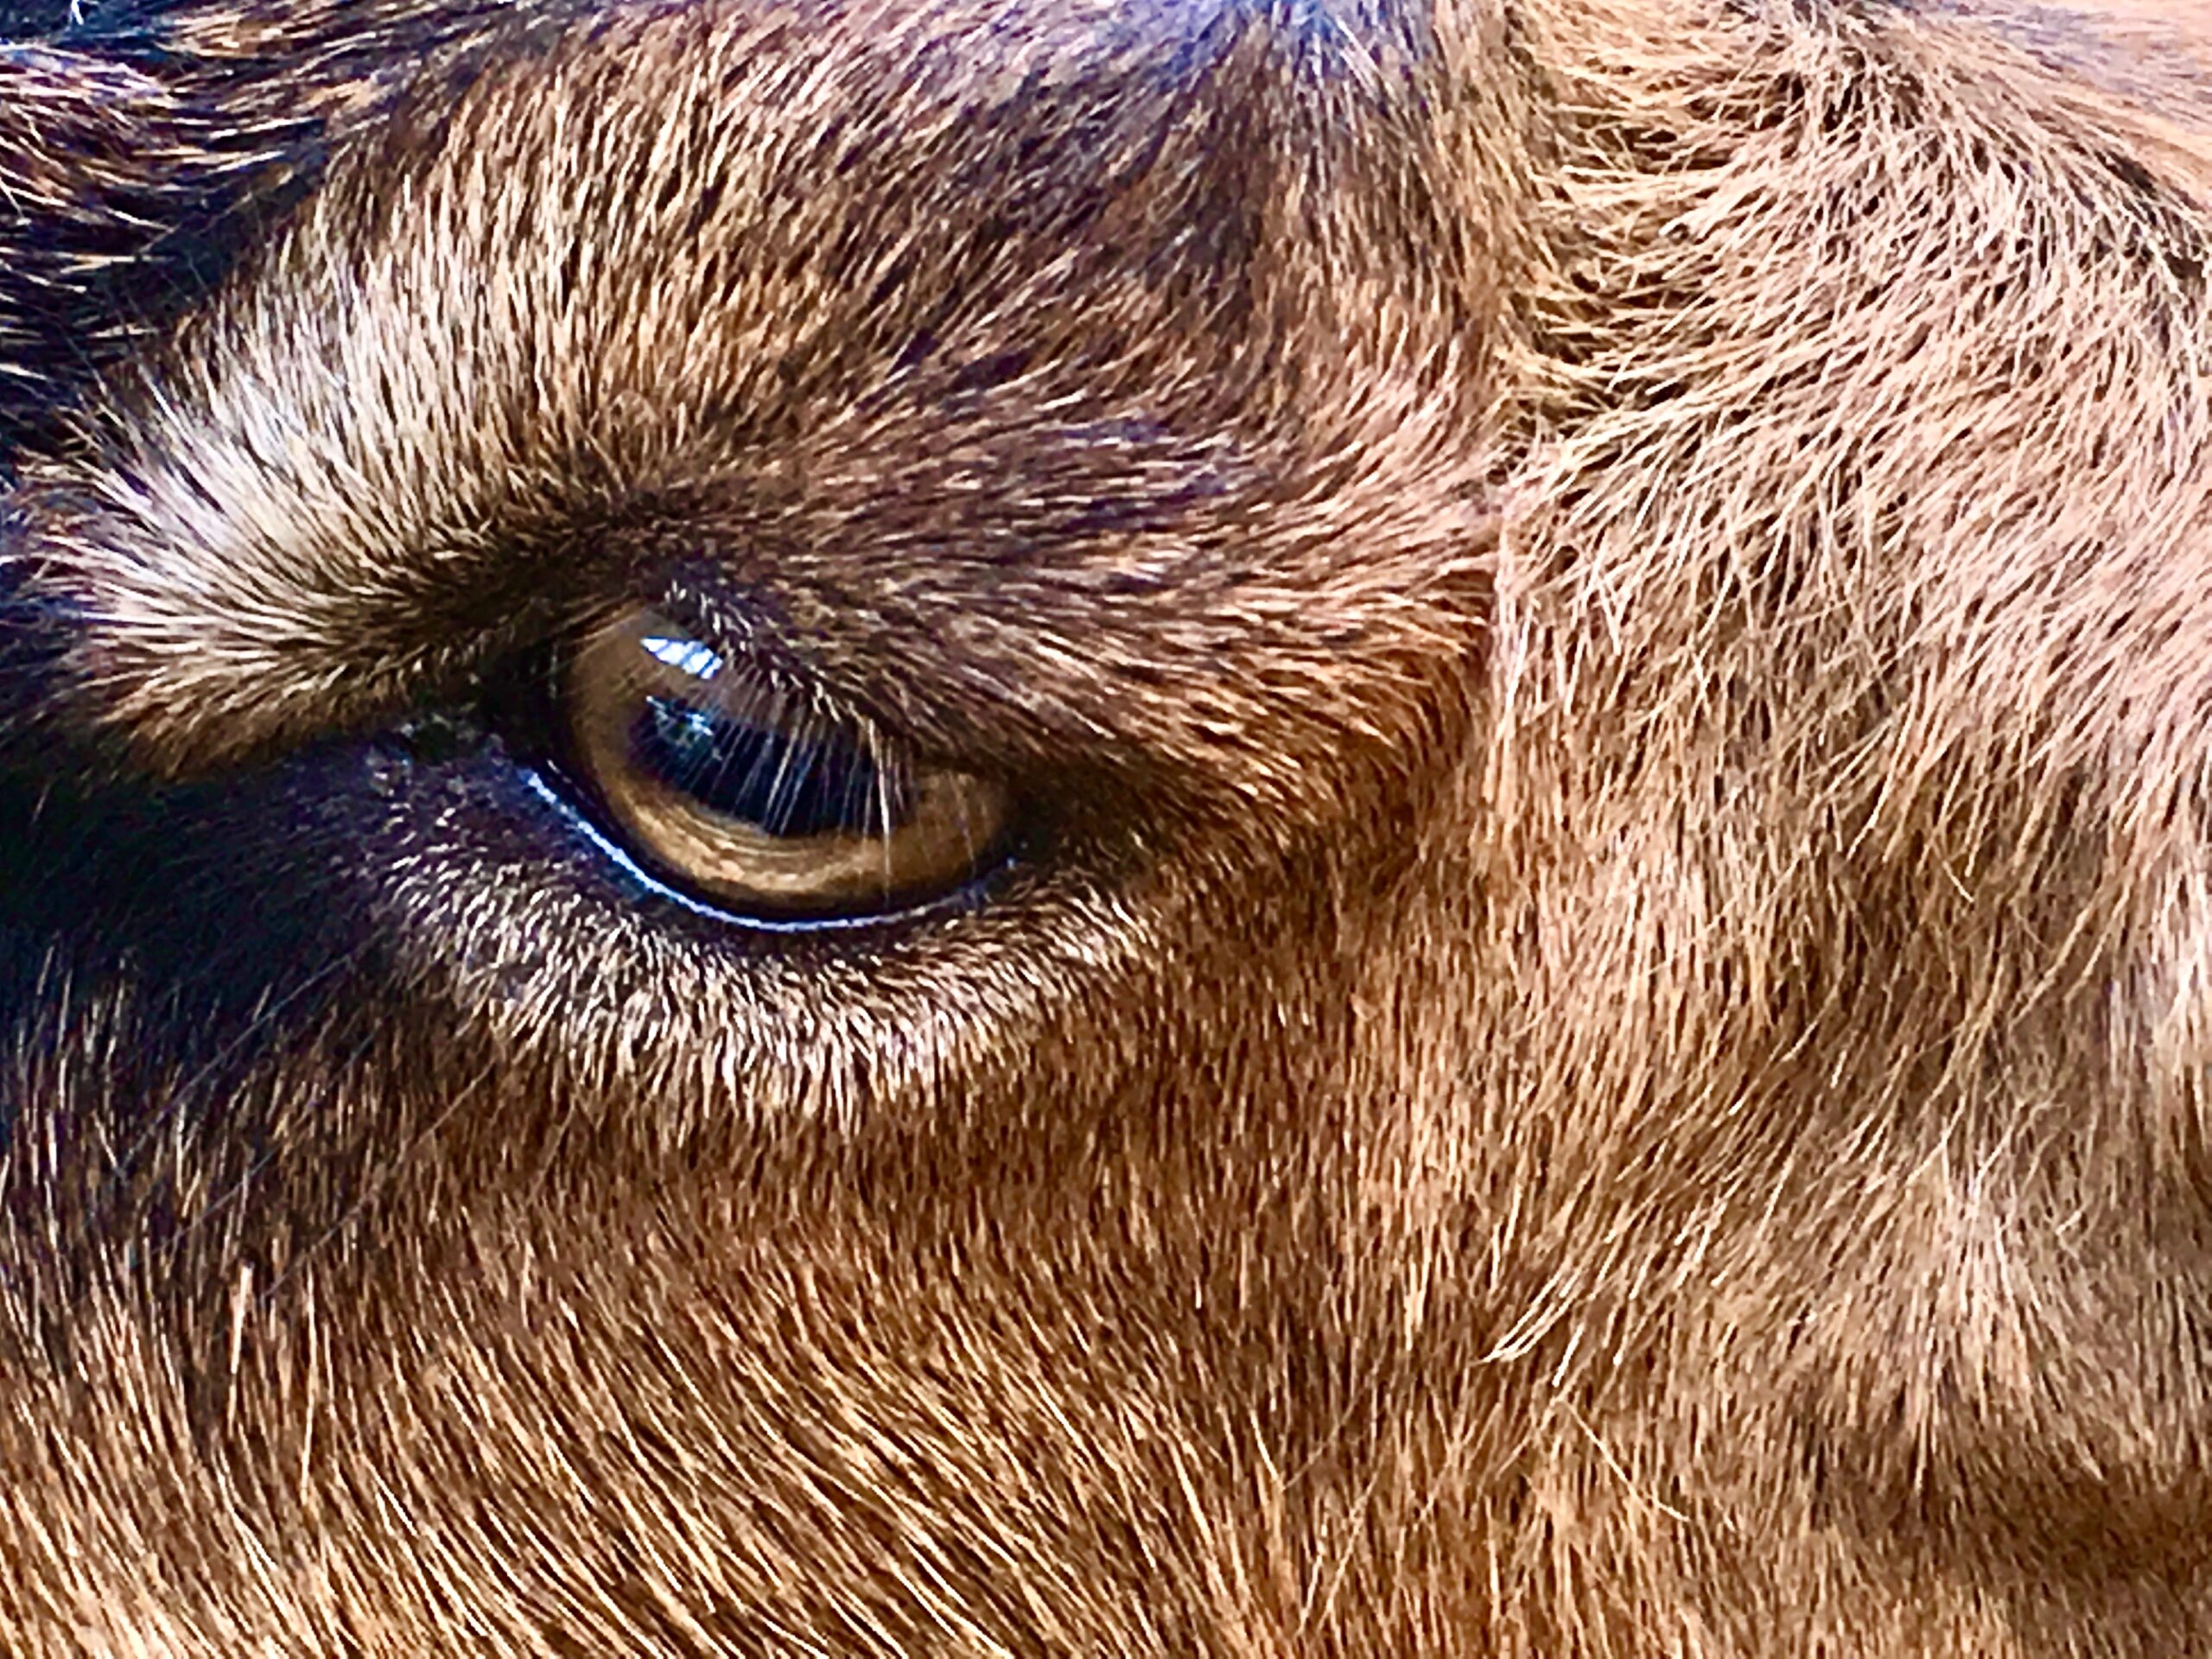 A close up of a goat's eye.